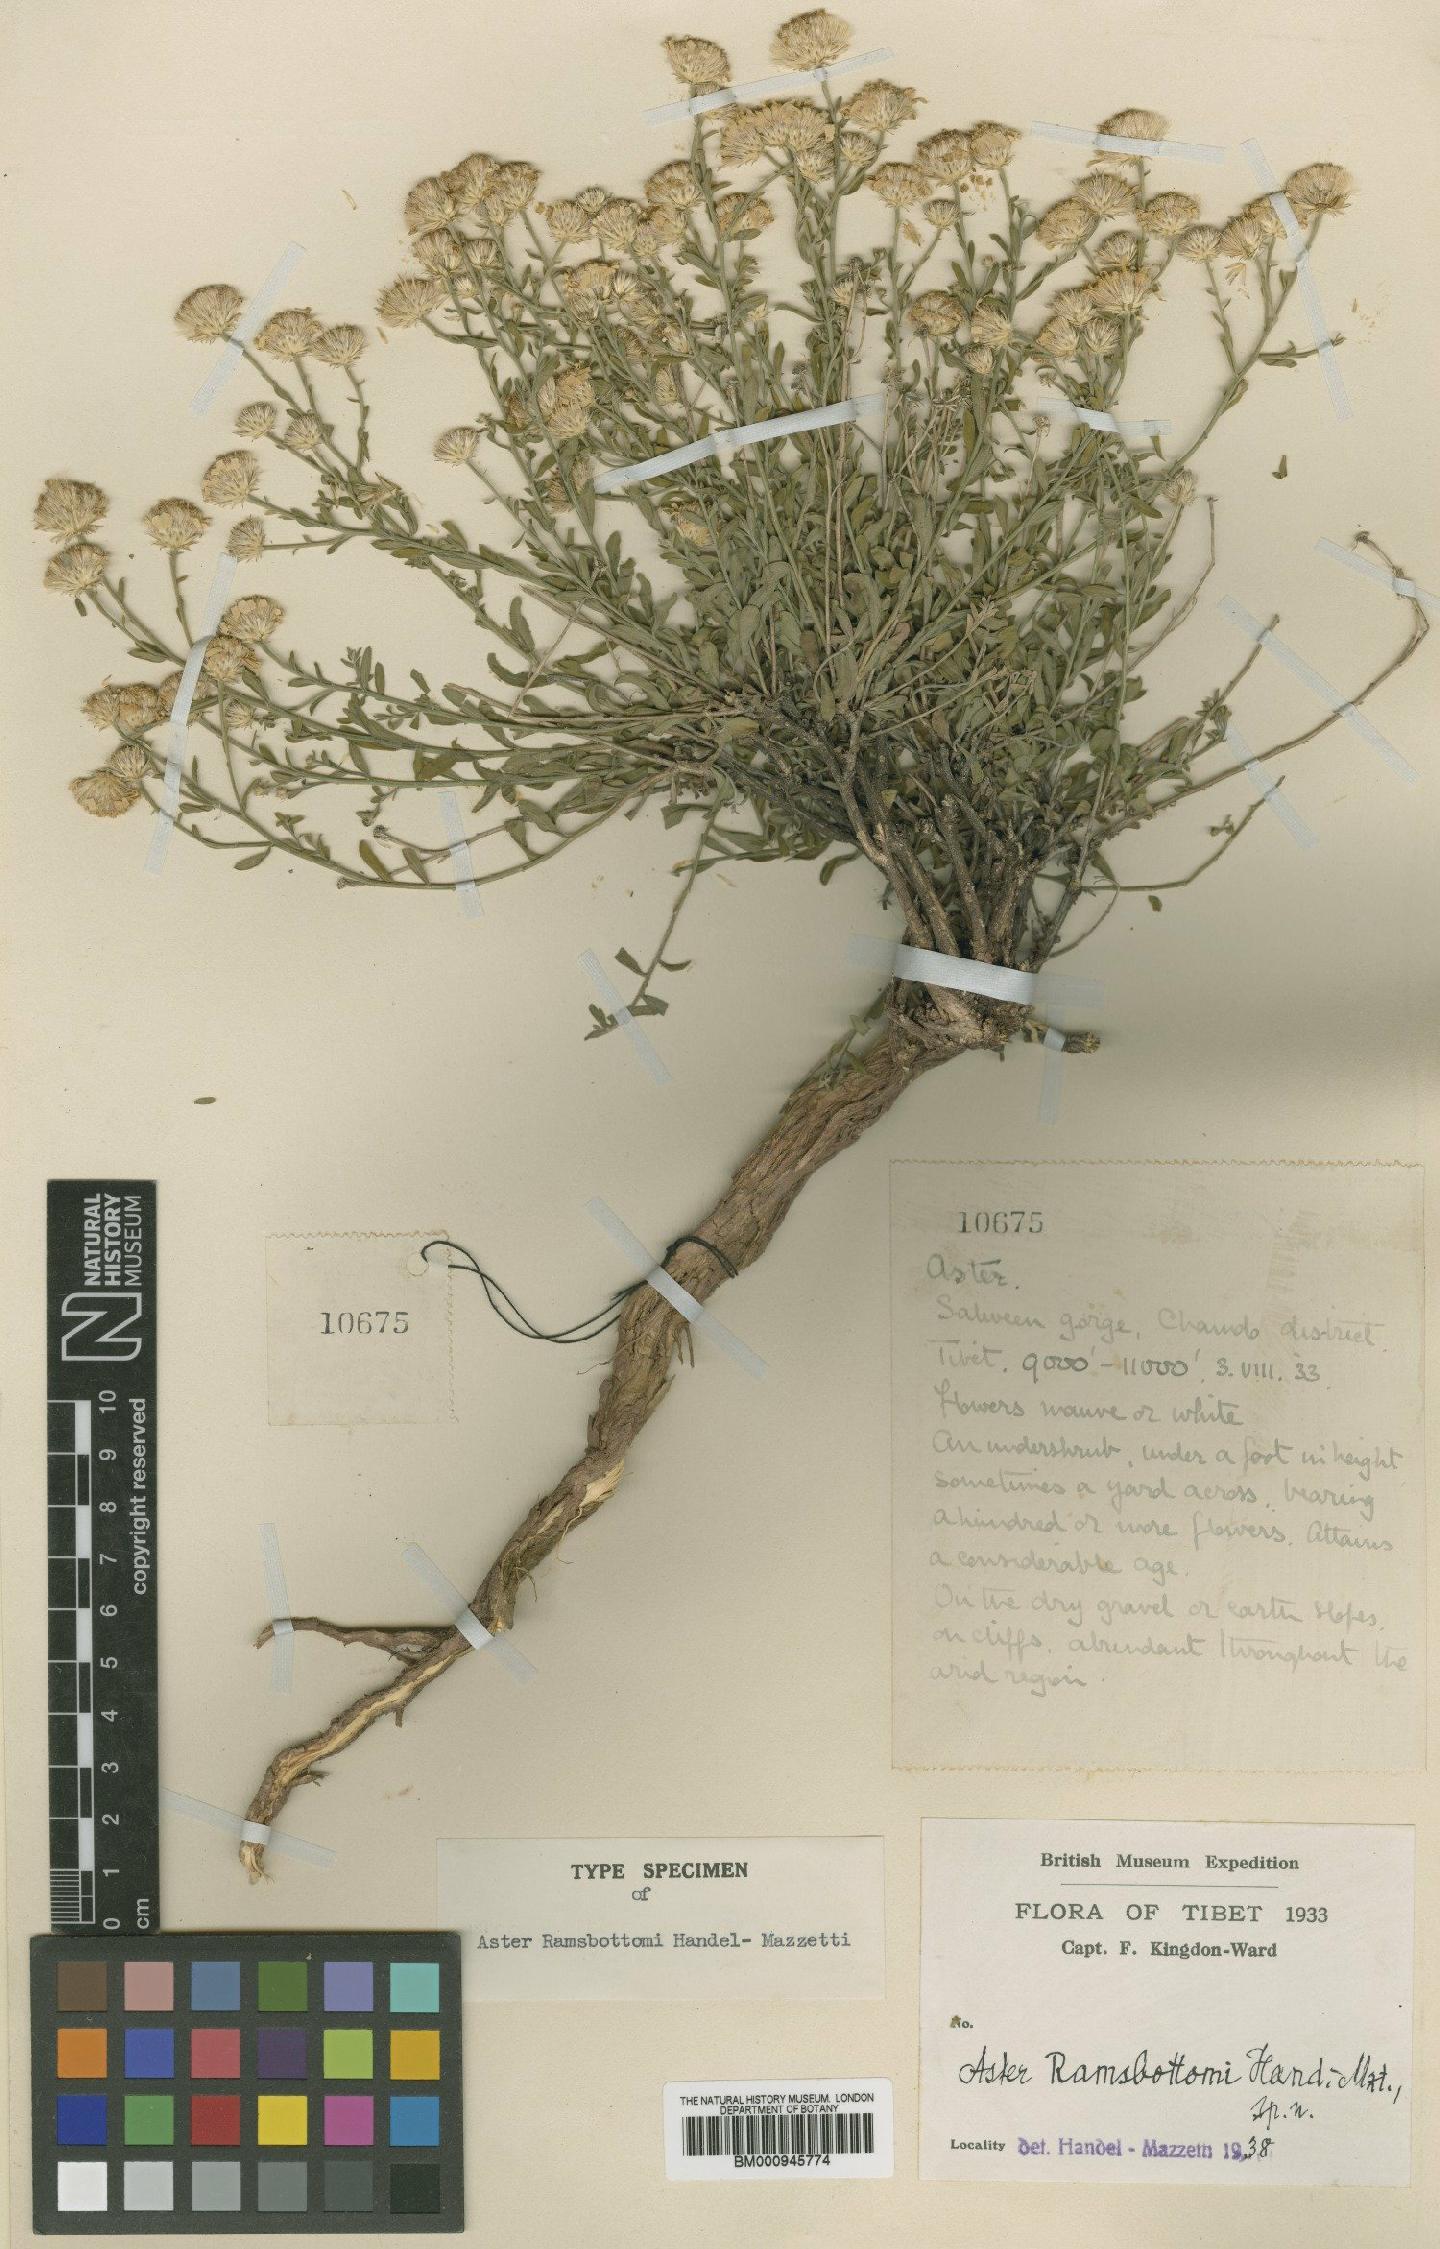 To NHMUK collection (Aster poliothamnus Diels; Type; NHMUK:ecatalogue:472101)